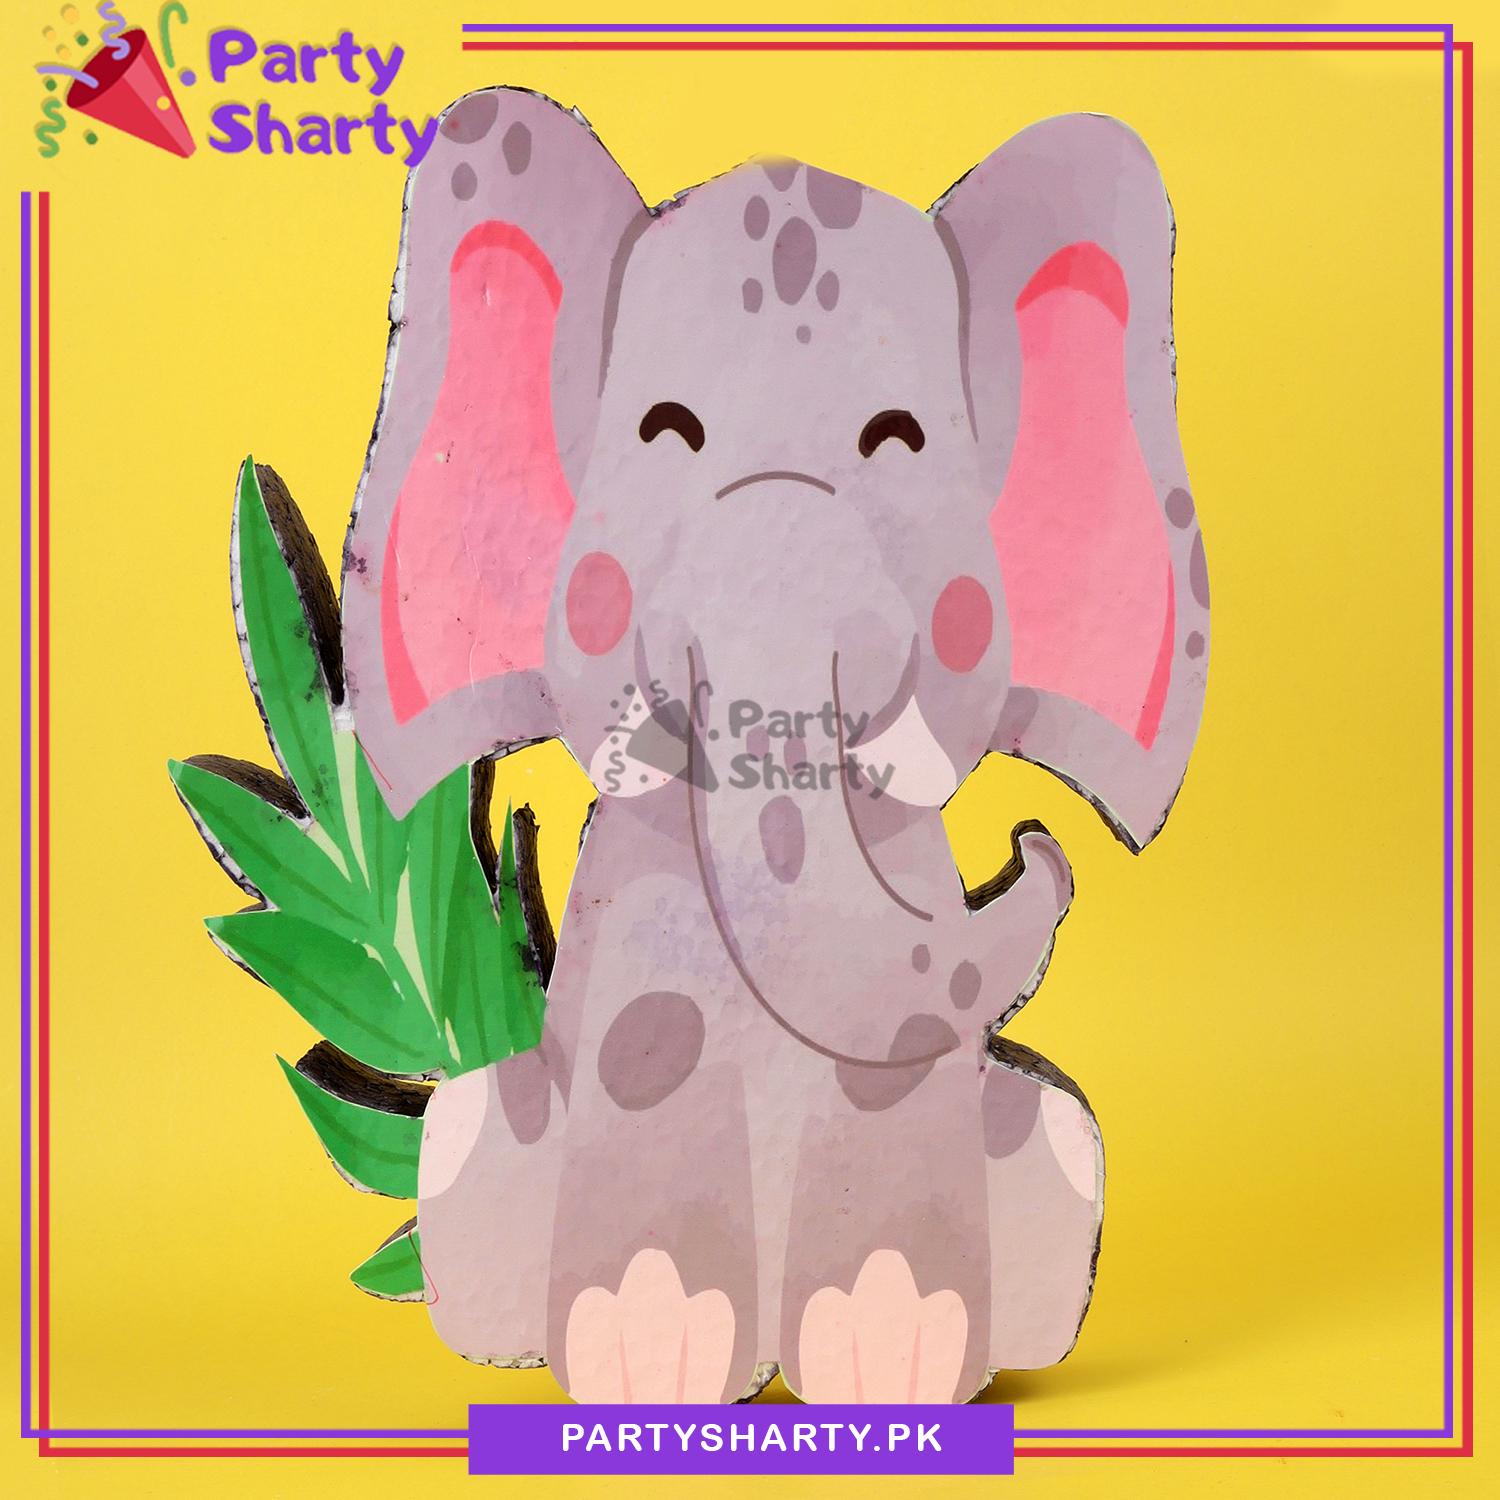 Cute Elephant Character Thermocol Standee For Jungle / Safari Theme Based Birthday Celebration and Party Decoration